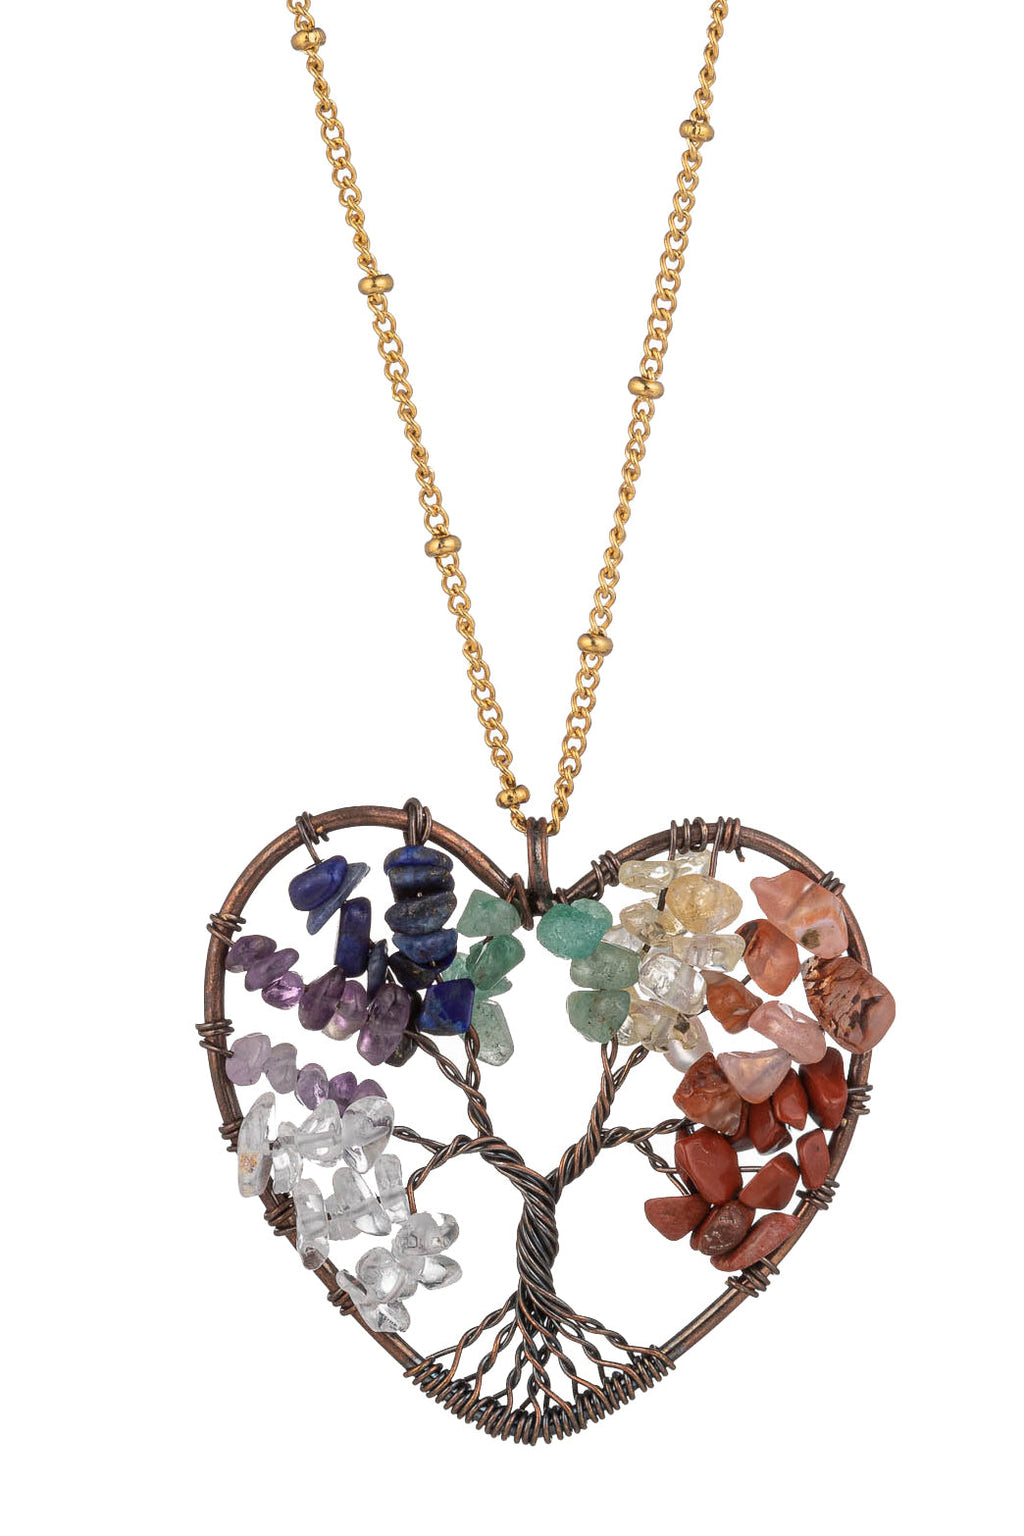 7 Chakra Tree of Life Pendant Necklace Copper Crystal Natural Stone Necklace  - China Jewelry and Fashion Jewelry price | Made-in-China.com